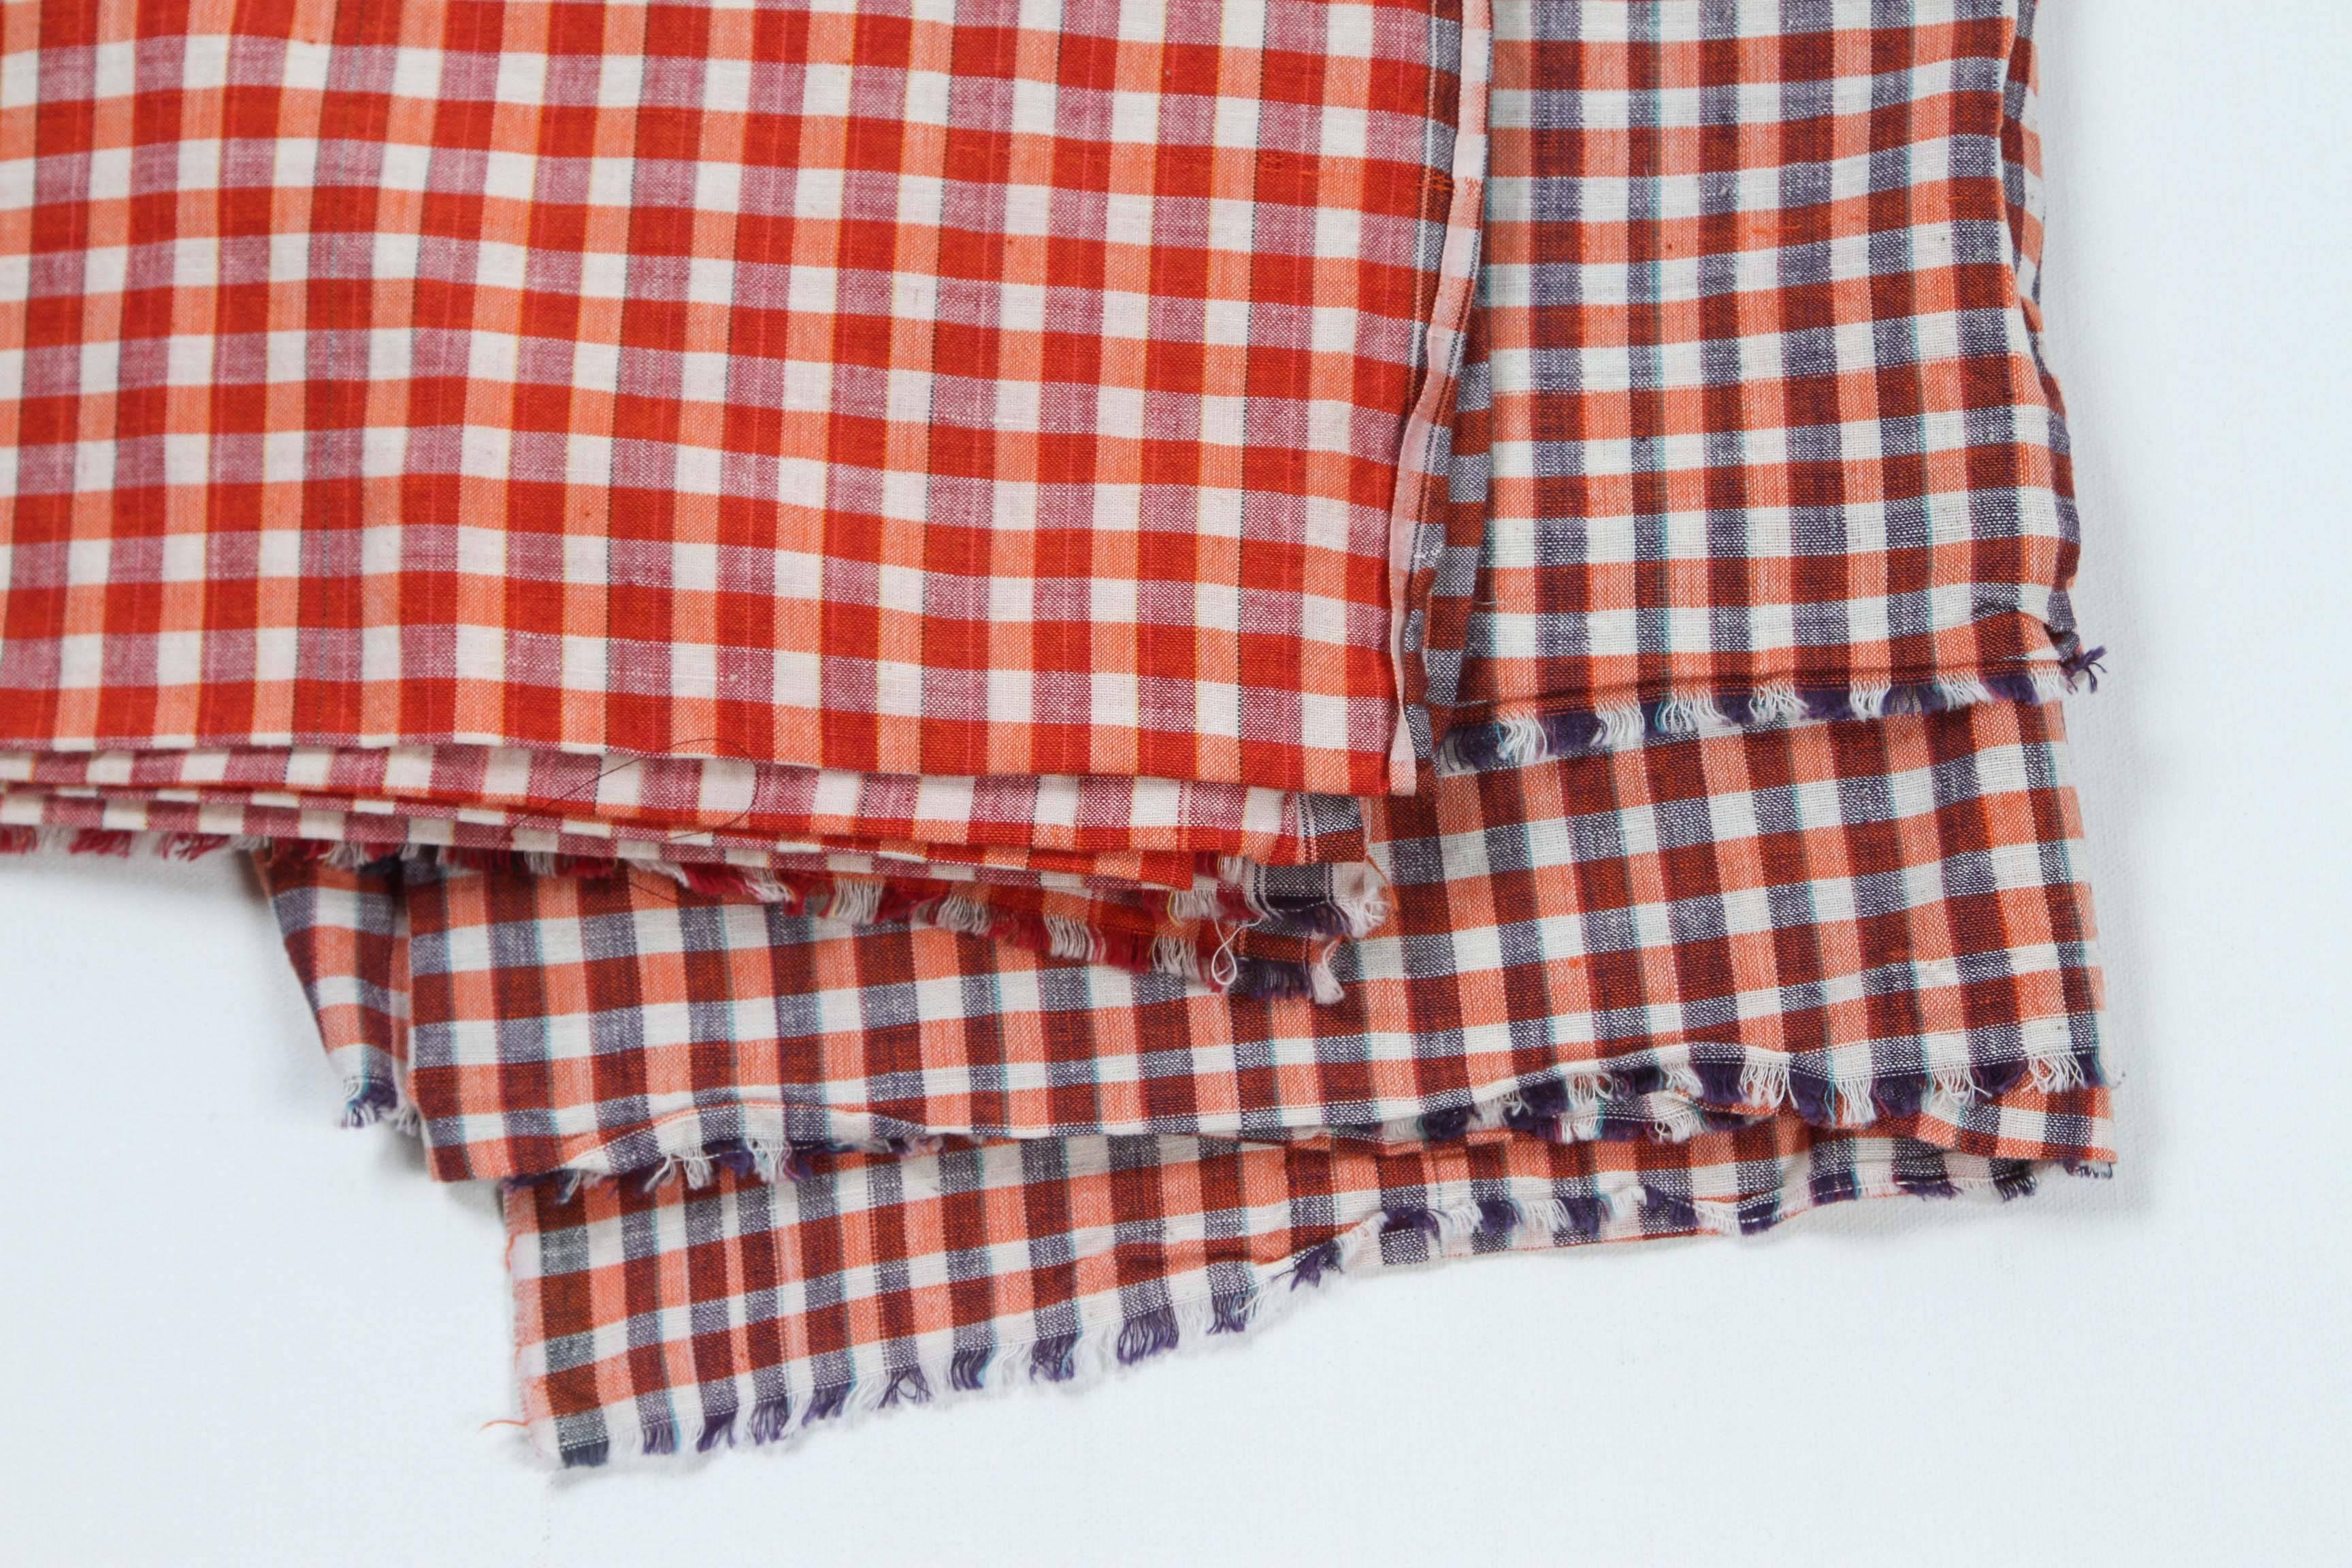 Khadi cotton fabric inspired by Gandhi and the Indian independence movement. Still made today and sold in Khadi shops all-over India.

The summer throws (Lungis) are used as wraparound sarongs in India.  Ethnic. 